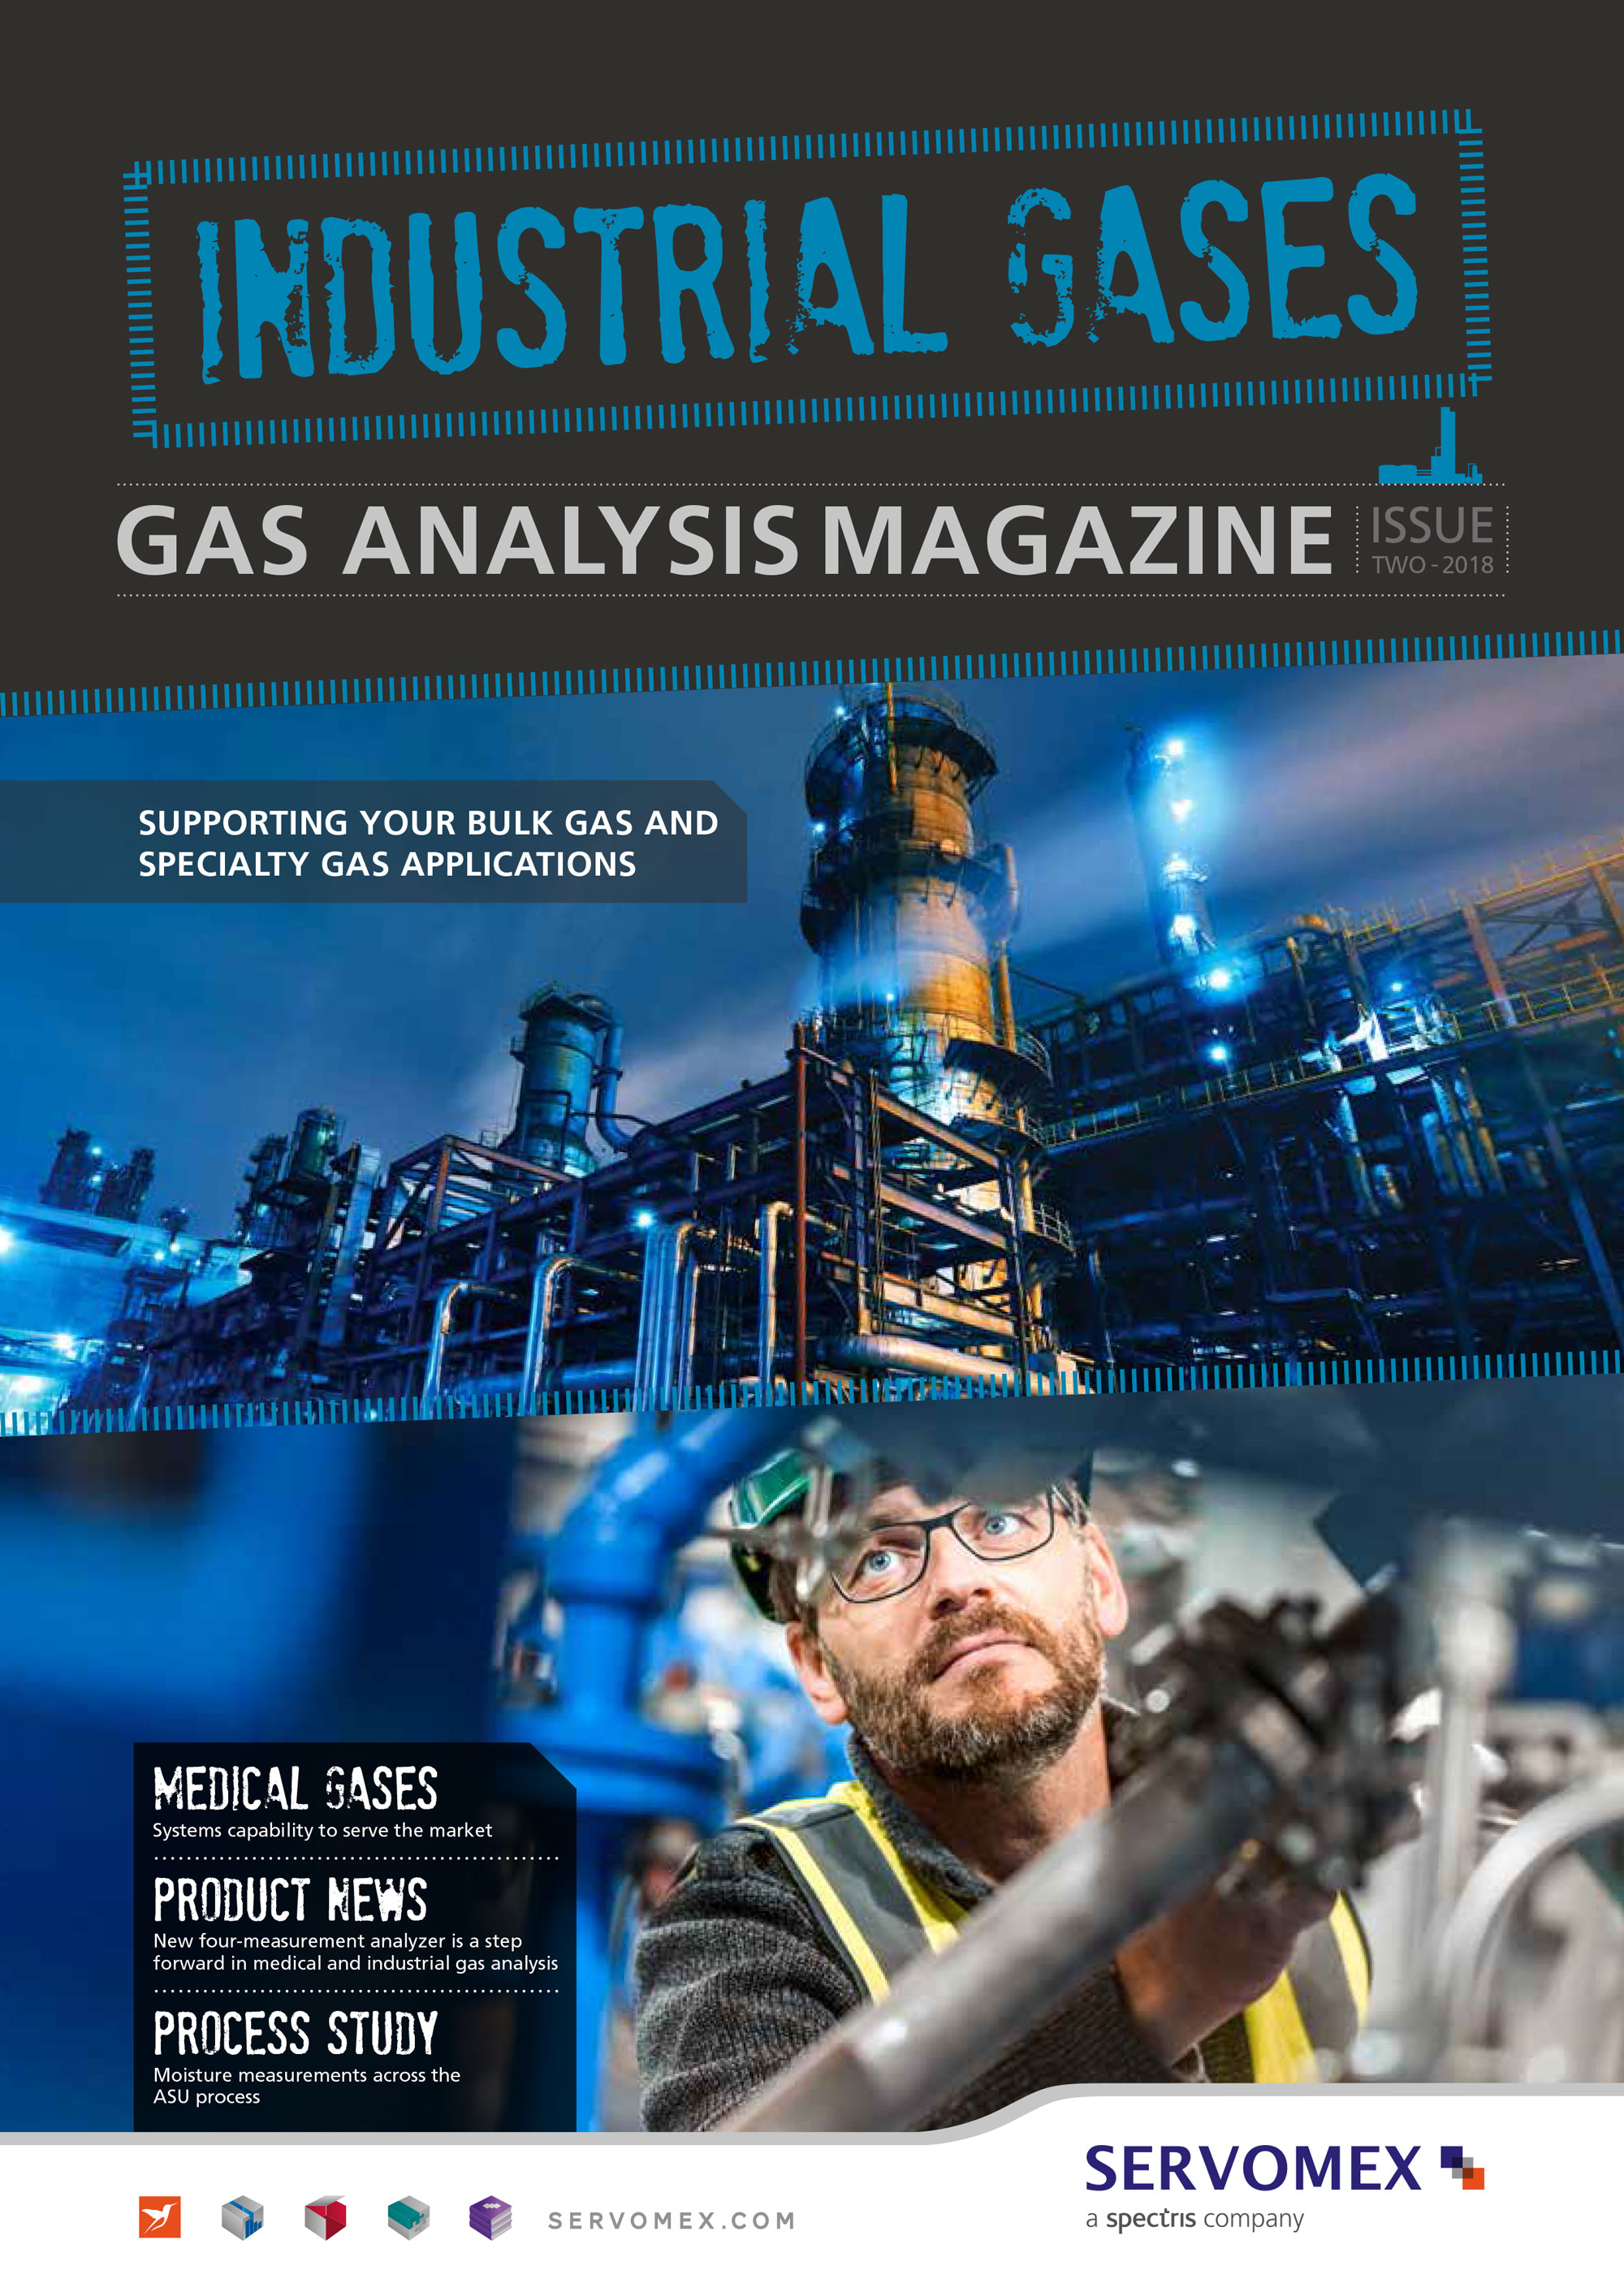 Industrial Gas - Issue 2 2018 - Check out the SERVOMEX ’s latest news in Industrial Gas, Issue 2 2018.